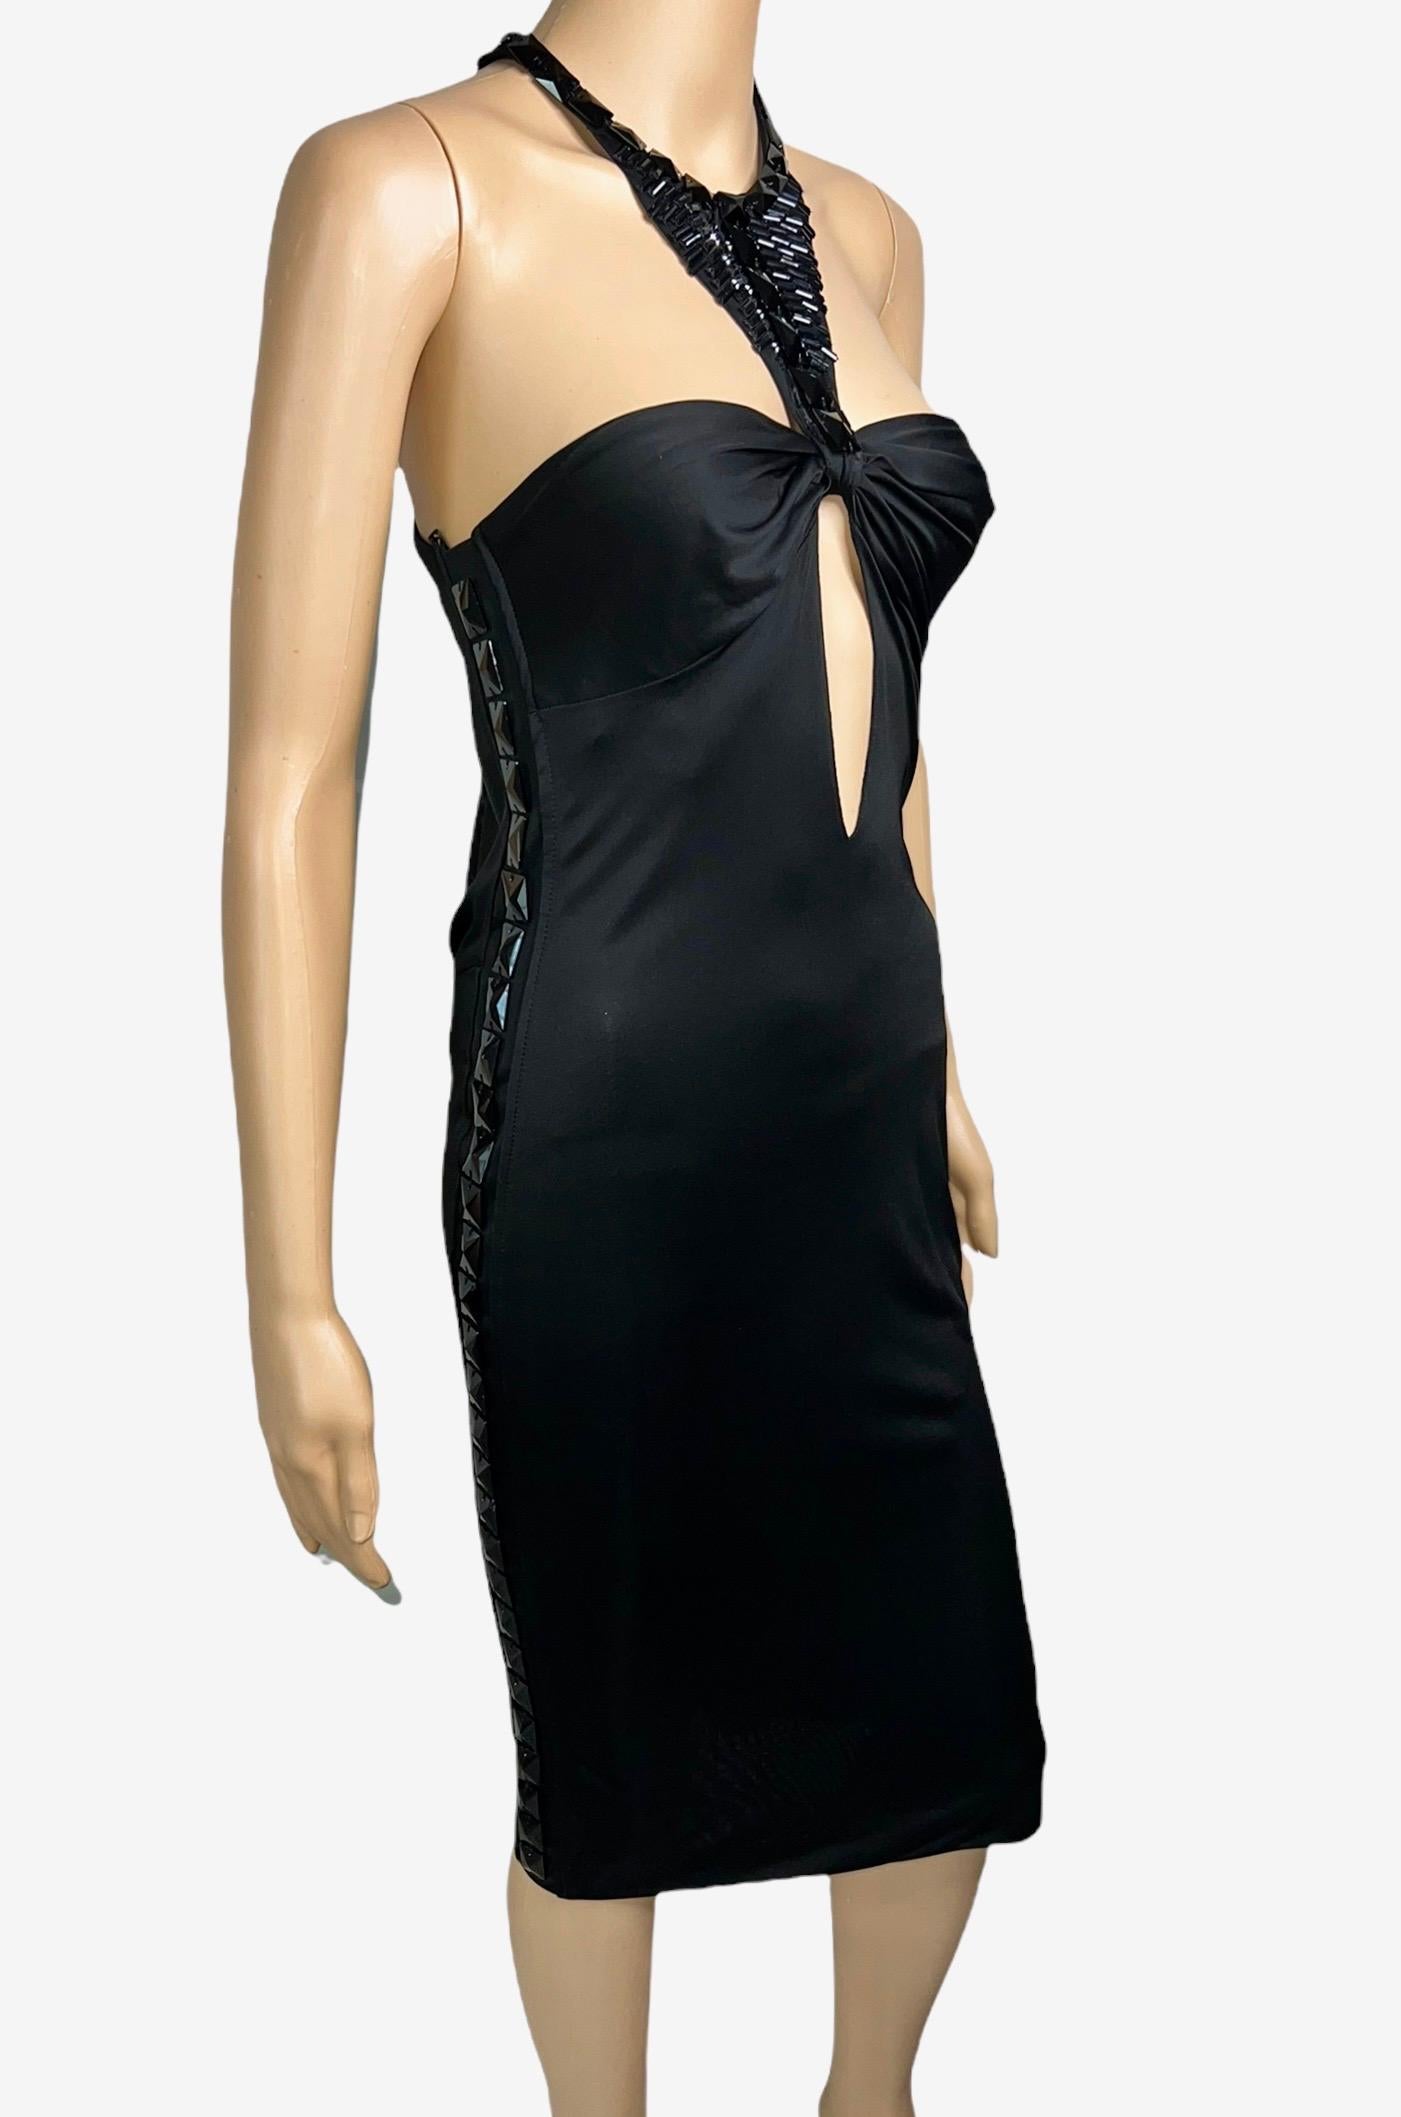 Tom Ford for Gucci F/W 2004 Embellished Plunging Cutout Black Evening Dress  For Sale 4